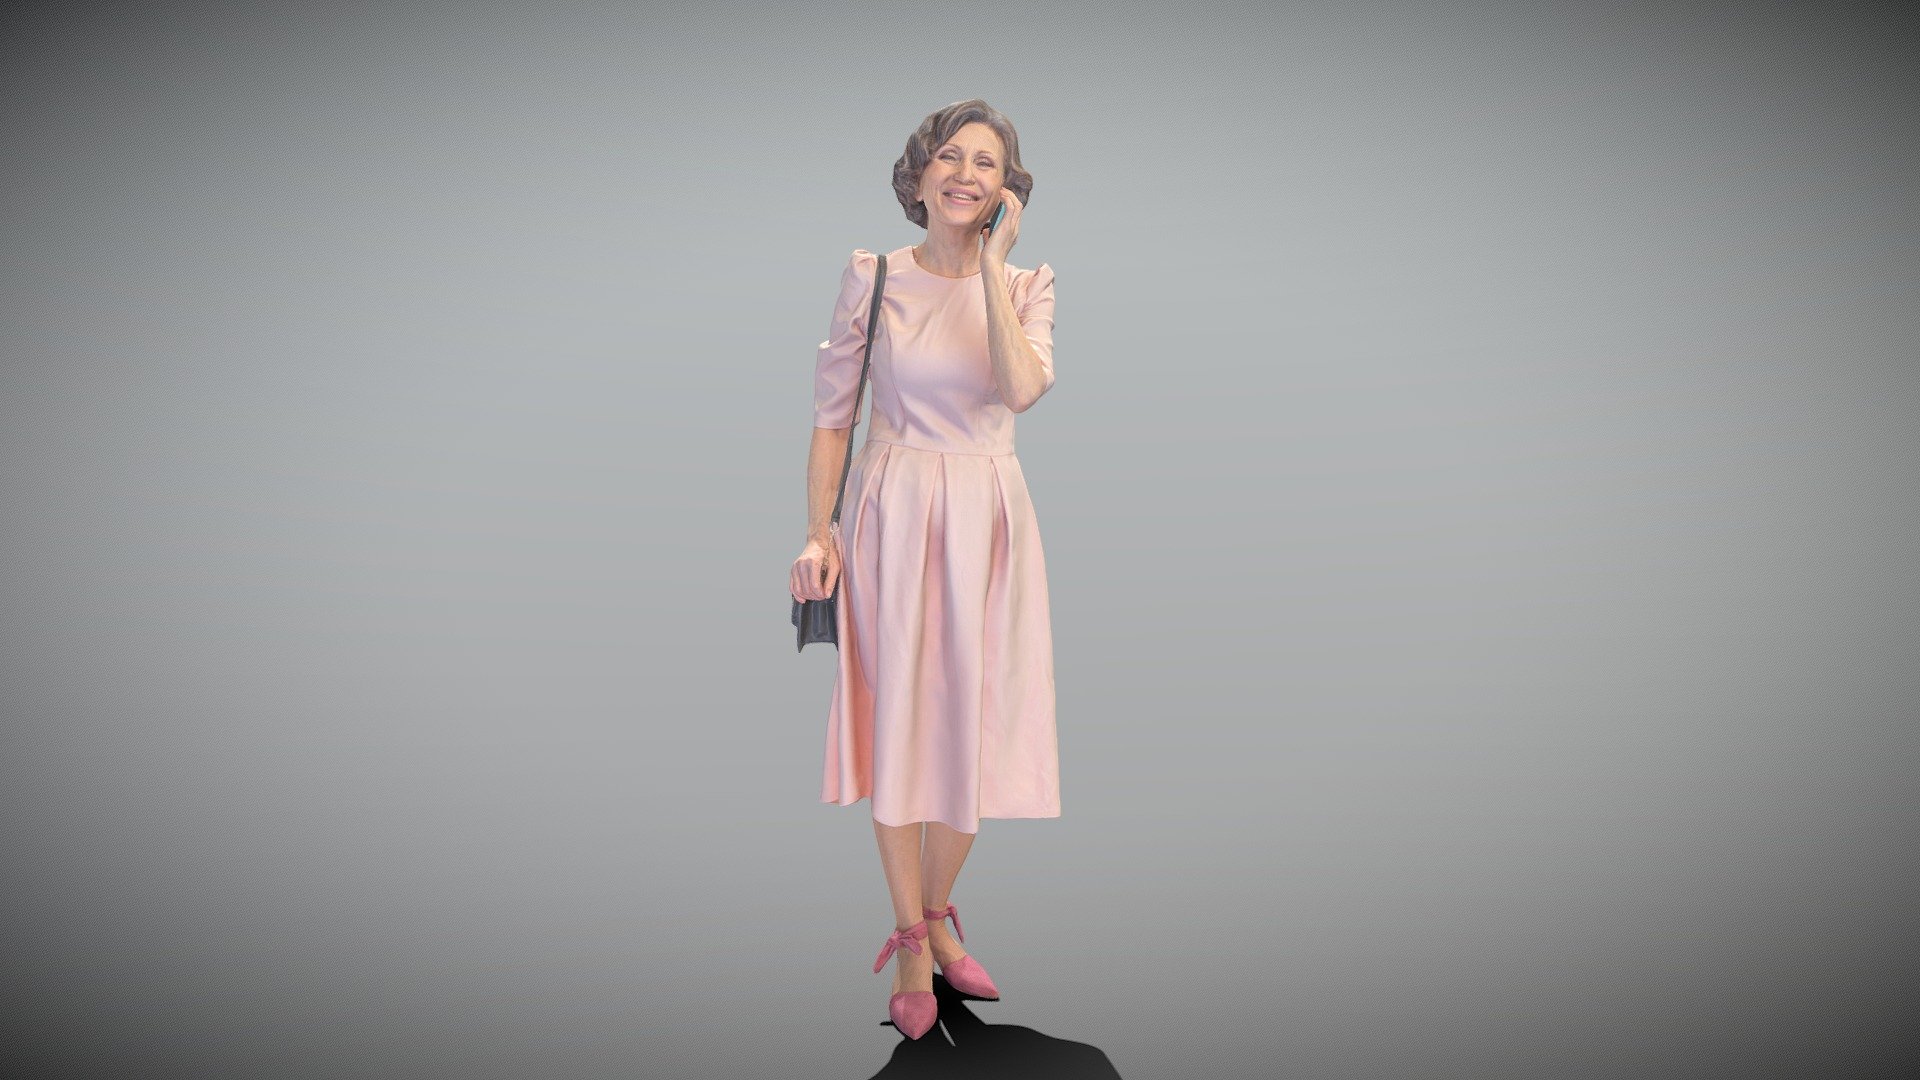 This is a true human size and detailed model of a beautiful mature woman of Caucasian appearance dressed in elegant dress. The model is captured in casual pose to be perfectly matching for various architectural, product visualization as a background character within urban installations, city designs, outdoor design presentations, VR/AR content, etc.

Technical specifications:




digital double 3d scan model

150k &amp; 30k triangles | double triangulated

high-poly model (.ztl tool with 5 subdivisions) clean and retopologized automatically via ZRemesher

sufficiently clean

PBR textures 8K resolution: Diffuse, Normal, Specular maps

non-overlapping UV map

no extra plugins are required for this model

Download package includes a Cinema 4D project file with Redshift shader, OBJ, FBX, STL files, which are applicable for 3ds Max, Maya, Unreal Engine, Unity, Blender, etc. All the textures you will find in the “Tex” folder, included into the main archive.

3D EVERYTHING

Stand with Ukraine! - Mature woman in dress talking on phone 358 - Buy Royalty Free 3D model by deep3dstudio 3d model